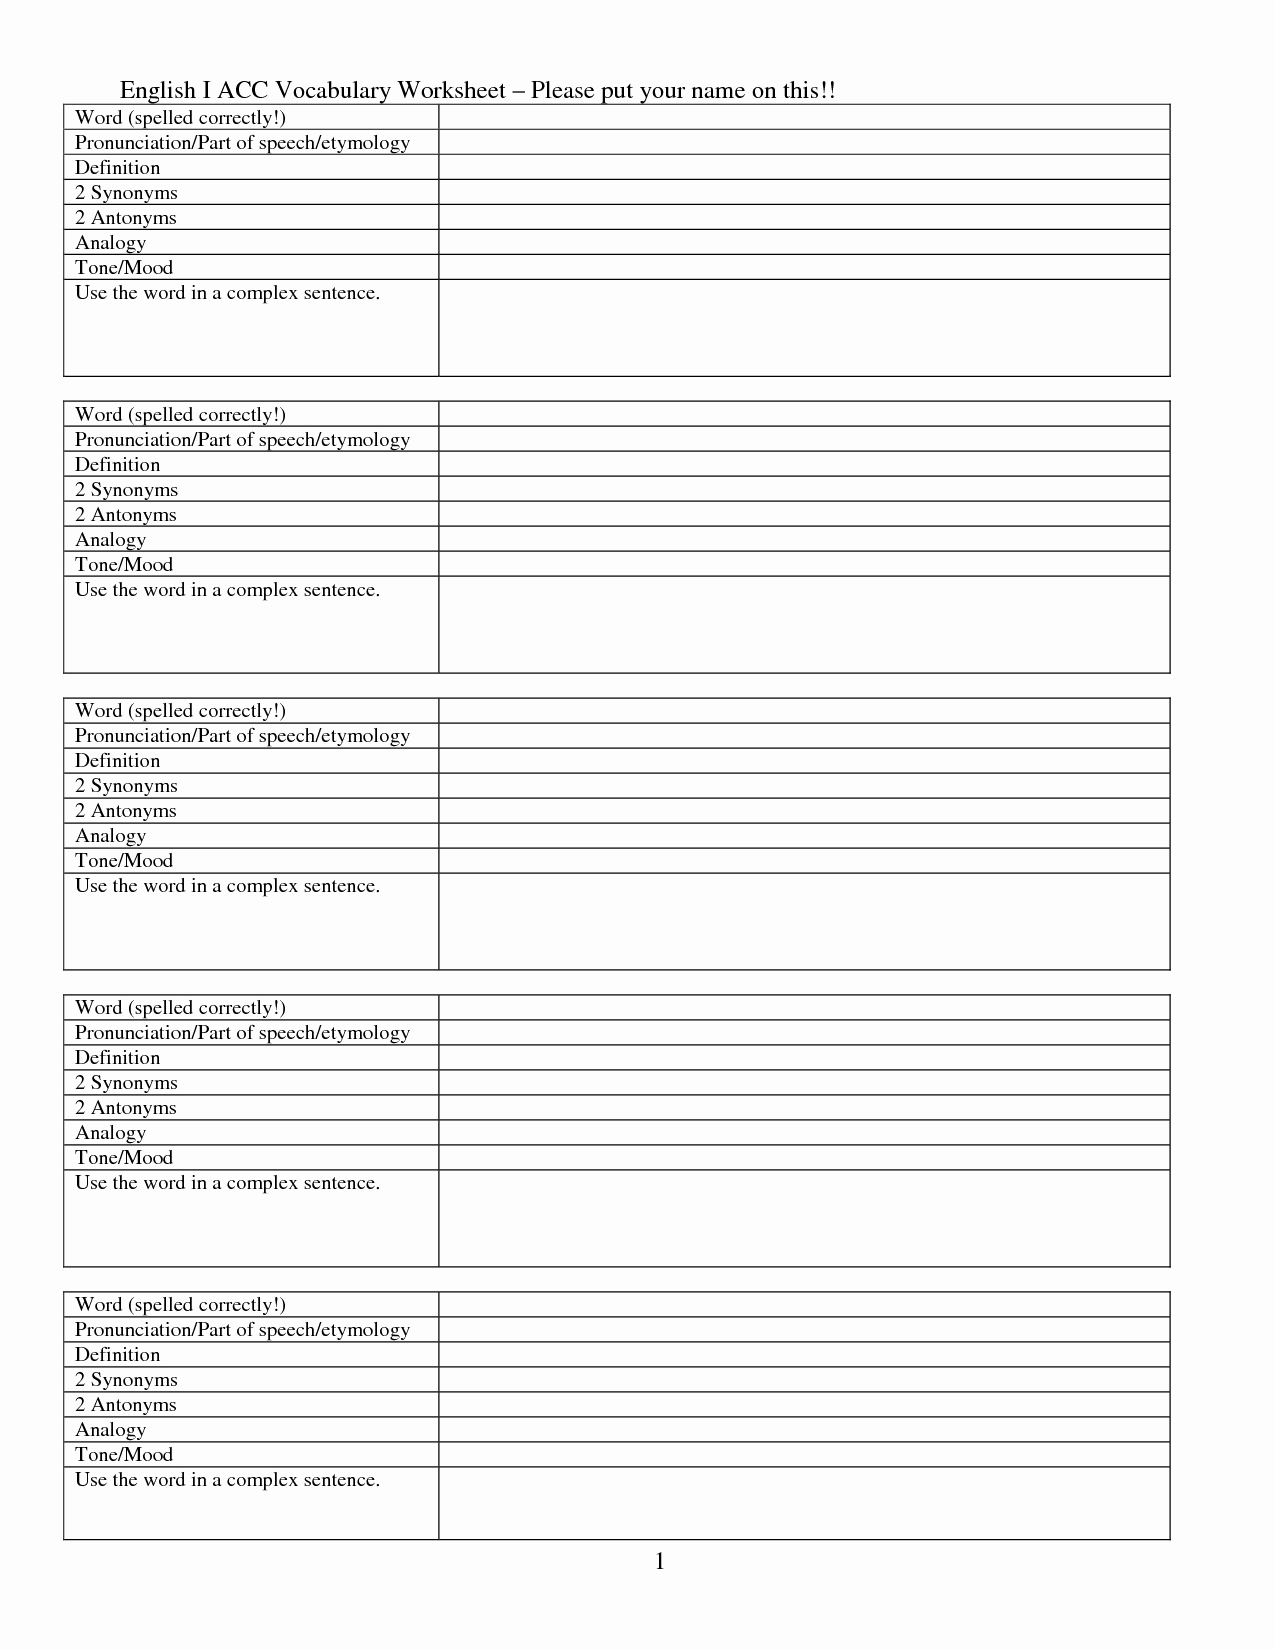 Blank Vocabulary Worksheet Template Awesome 10 Best Of Blank Vocabulary Worksheets Template